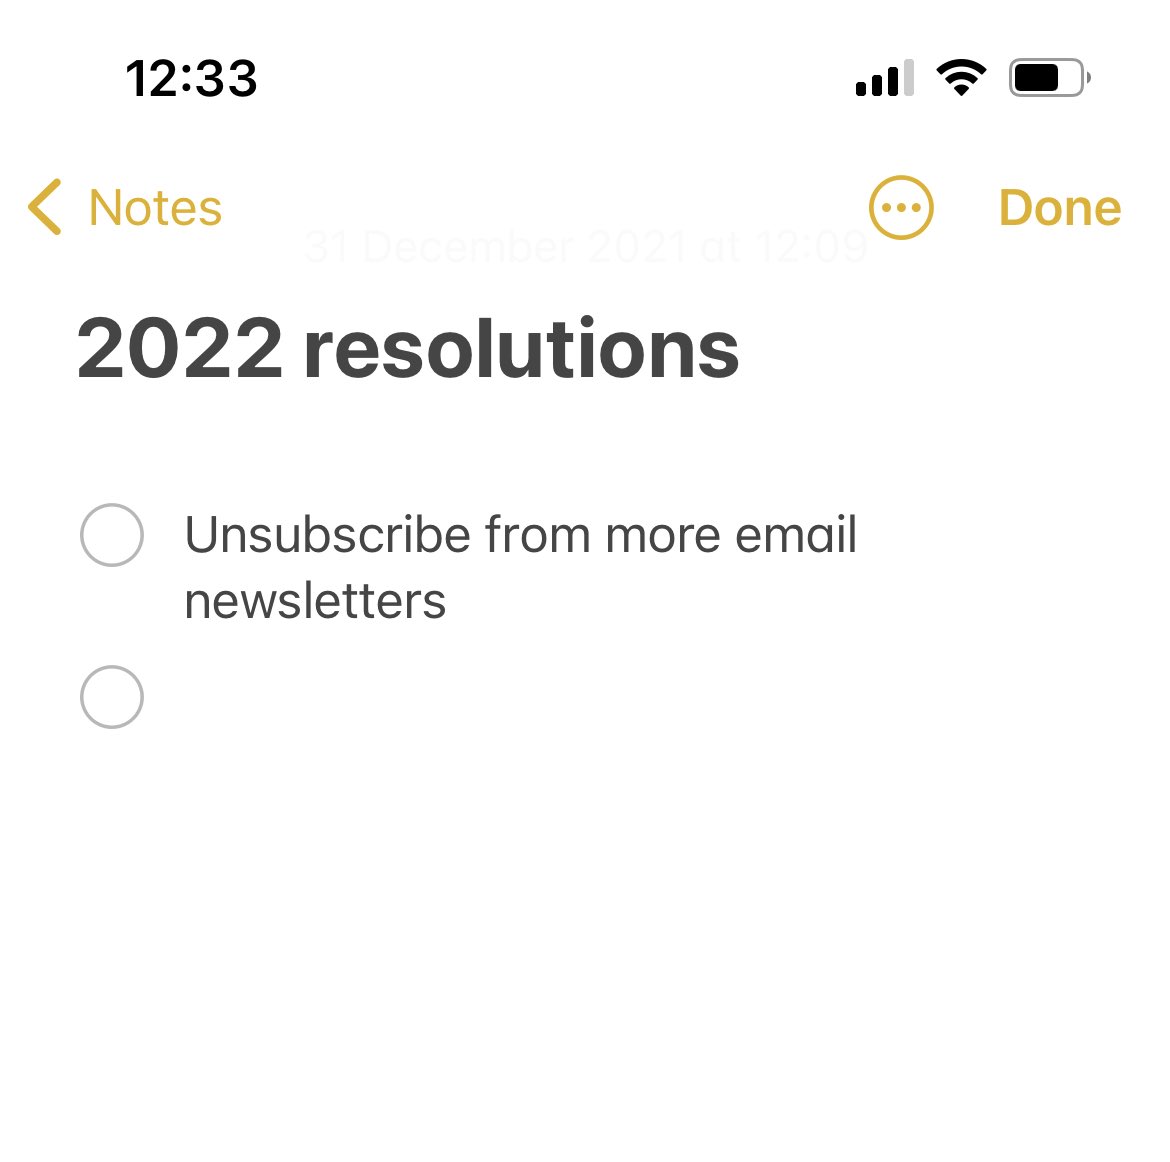 My resolutions list is pretty short so far… open to suggestions.